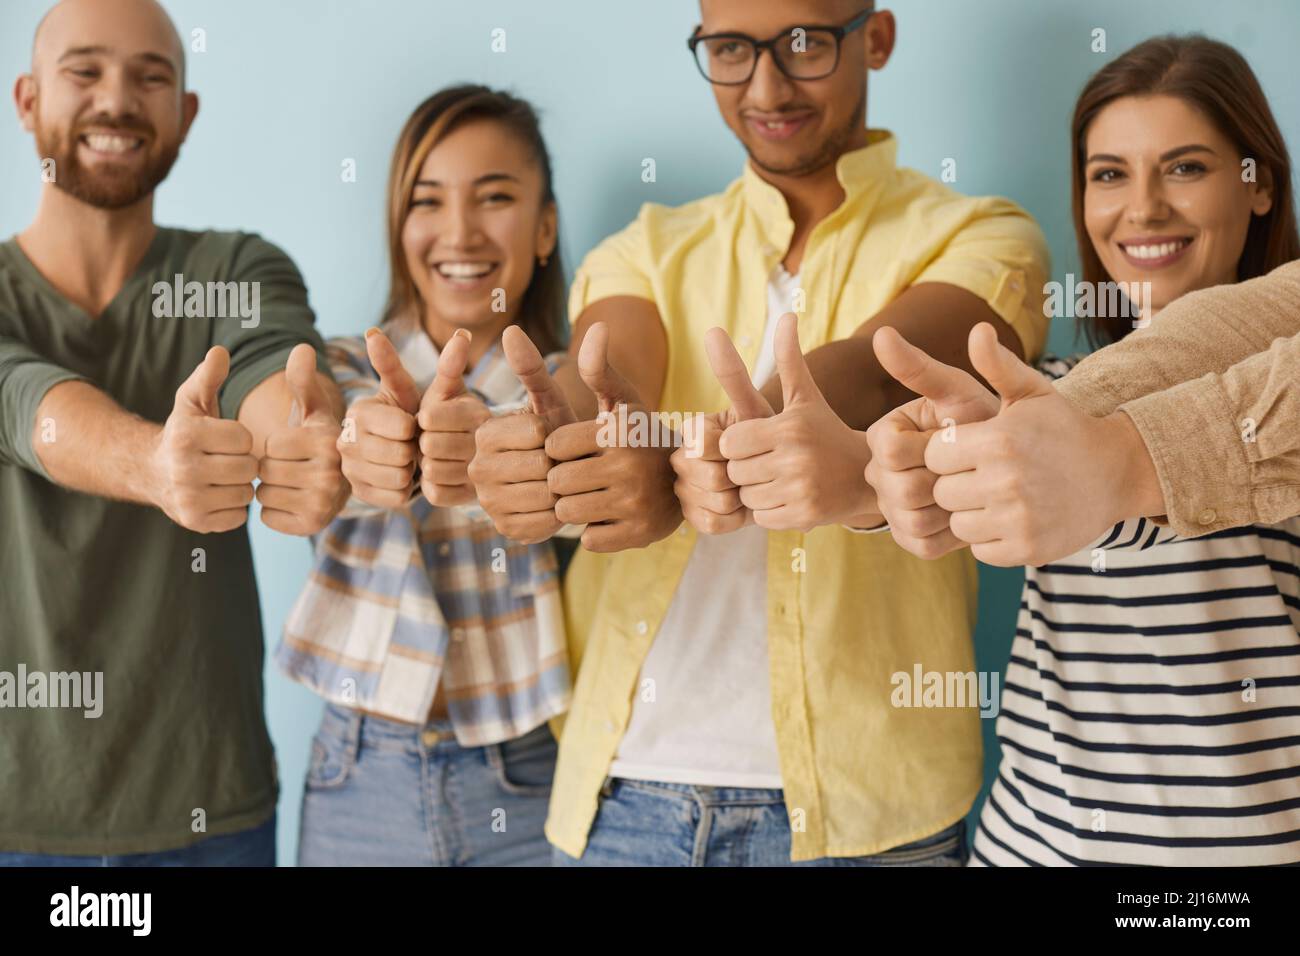 Diverse group of happy young men and women smiling and giving thumbs up together Stock Photo